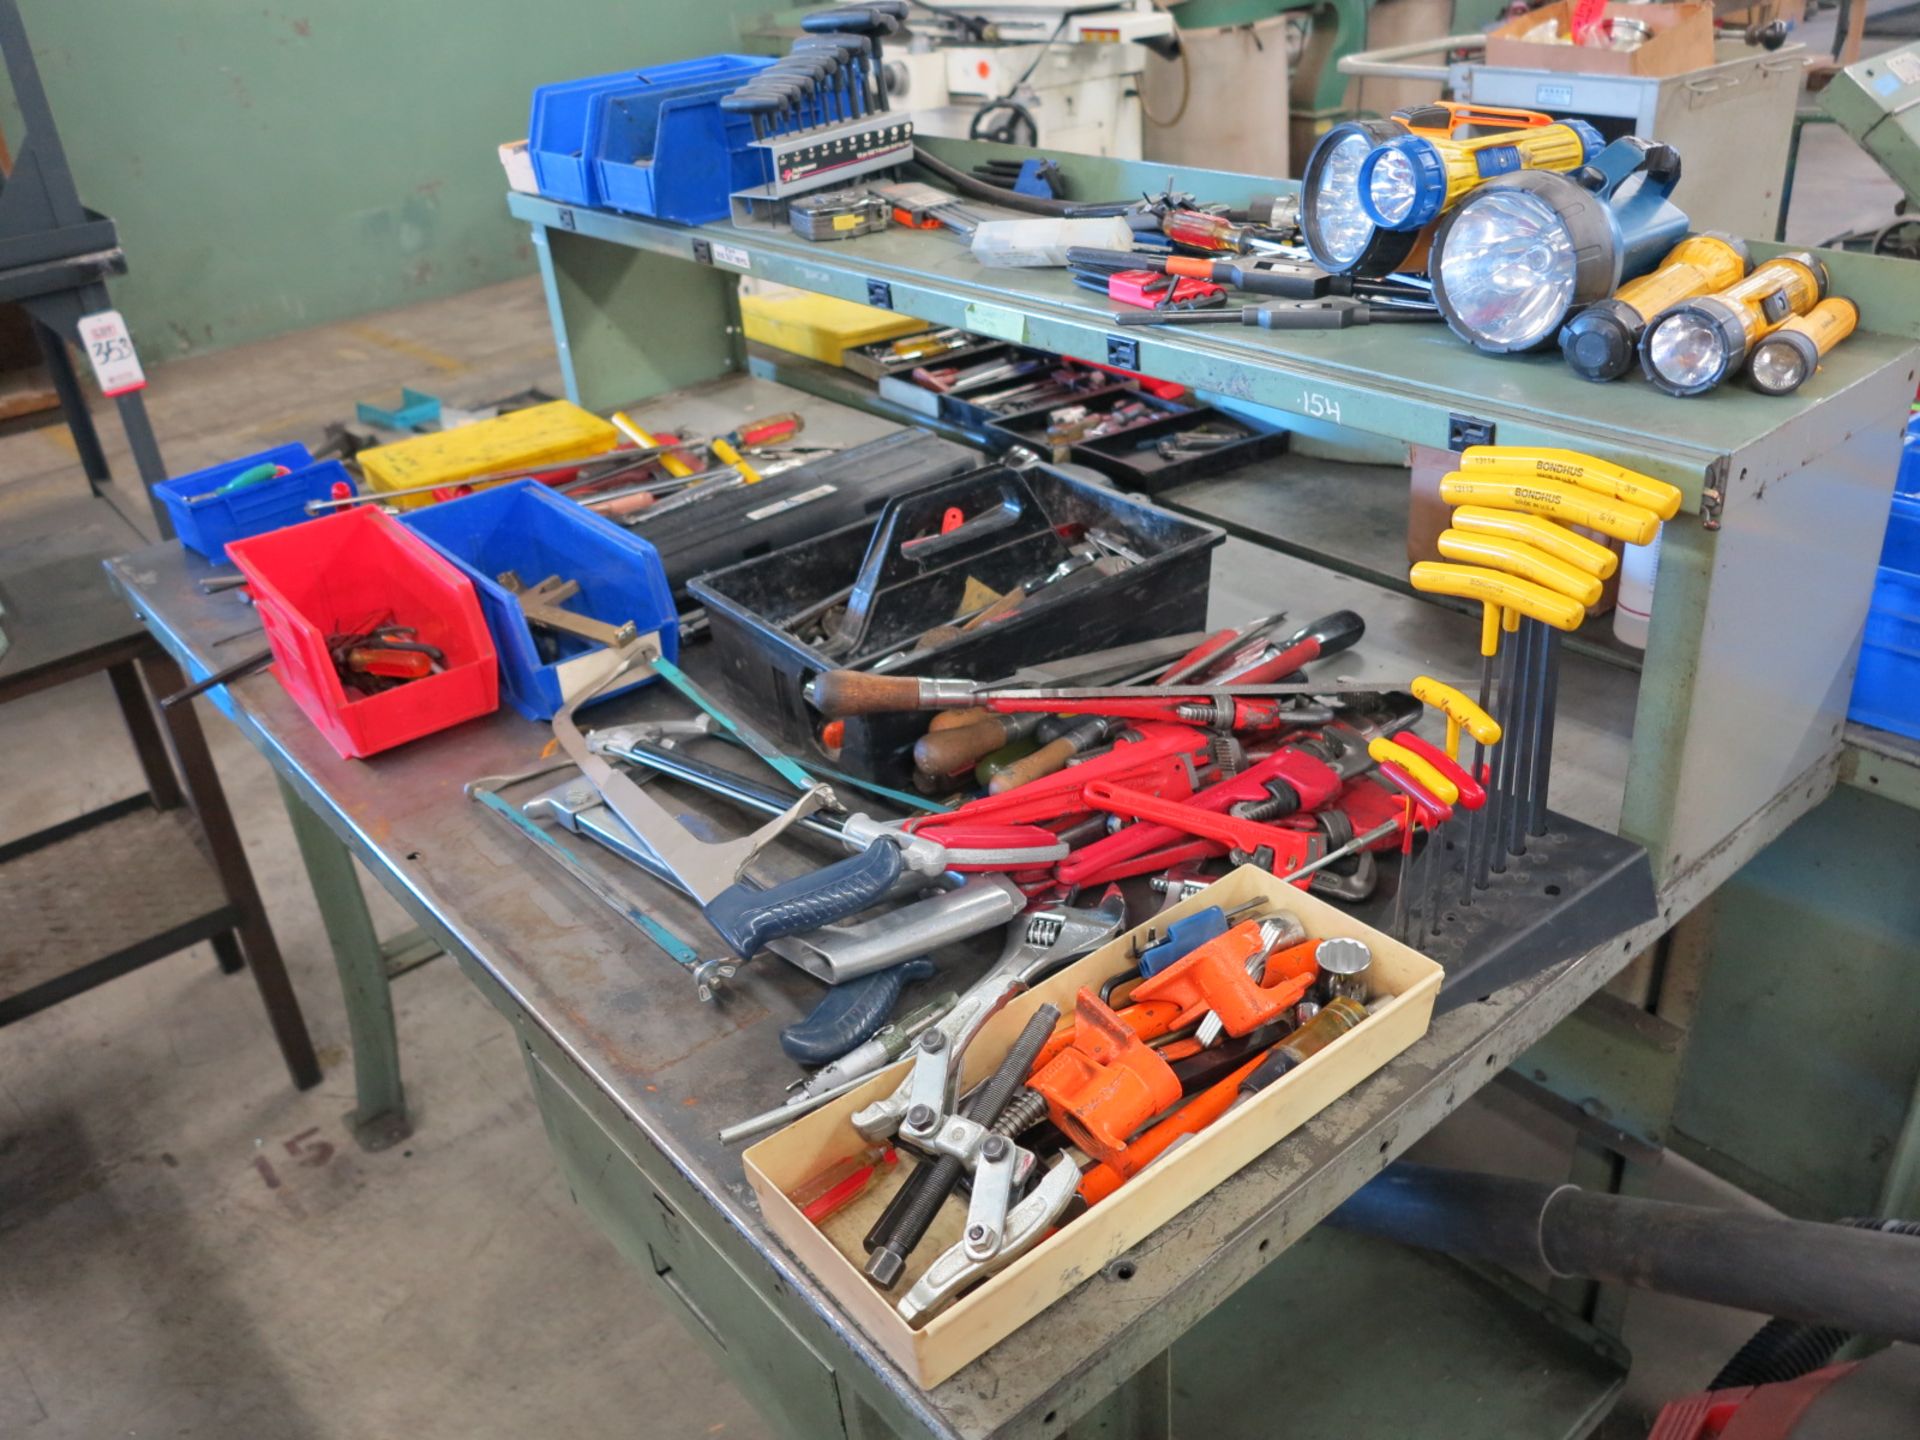 5' STEEL WORKBENCH WITH LARGE ASSORTMENT OF HAND TOOLS INCLUDING APPROX 5 TORQUE WRENCHES, ETC.